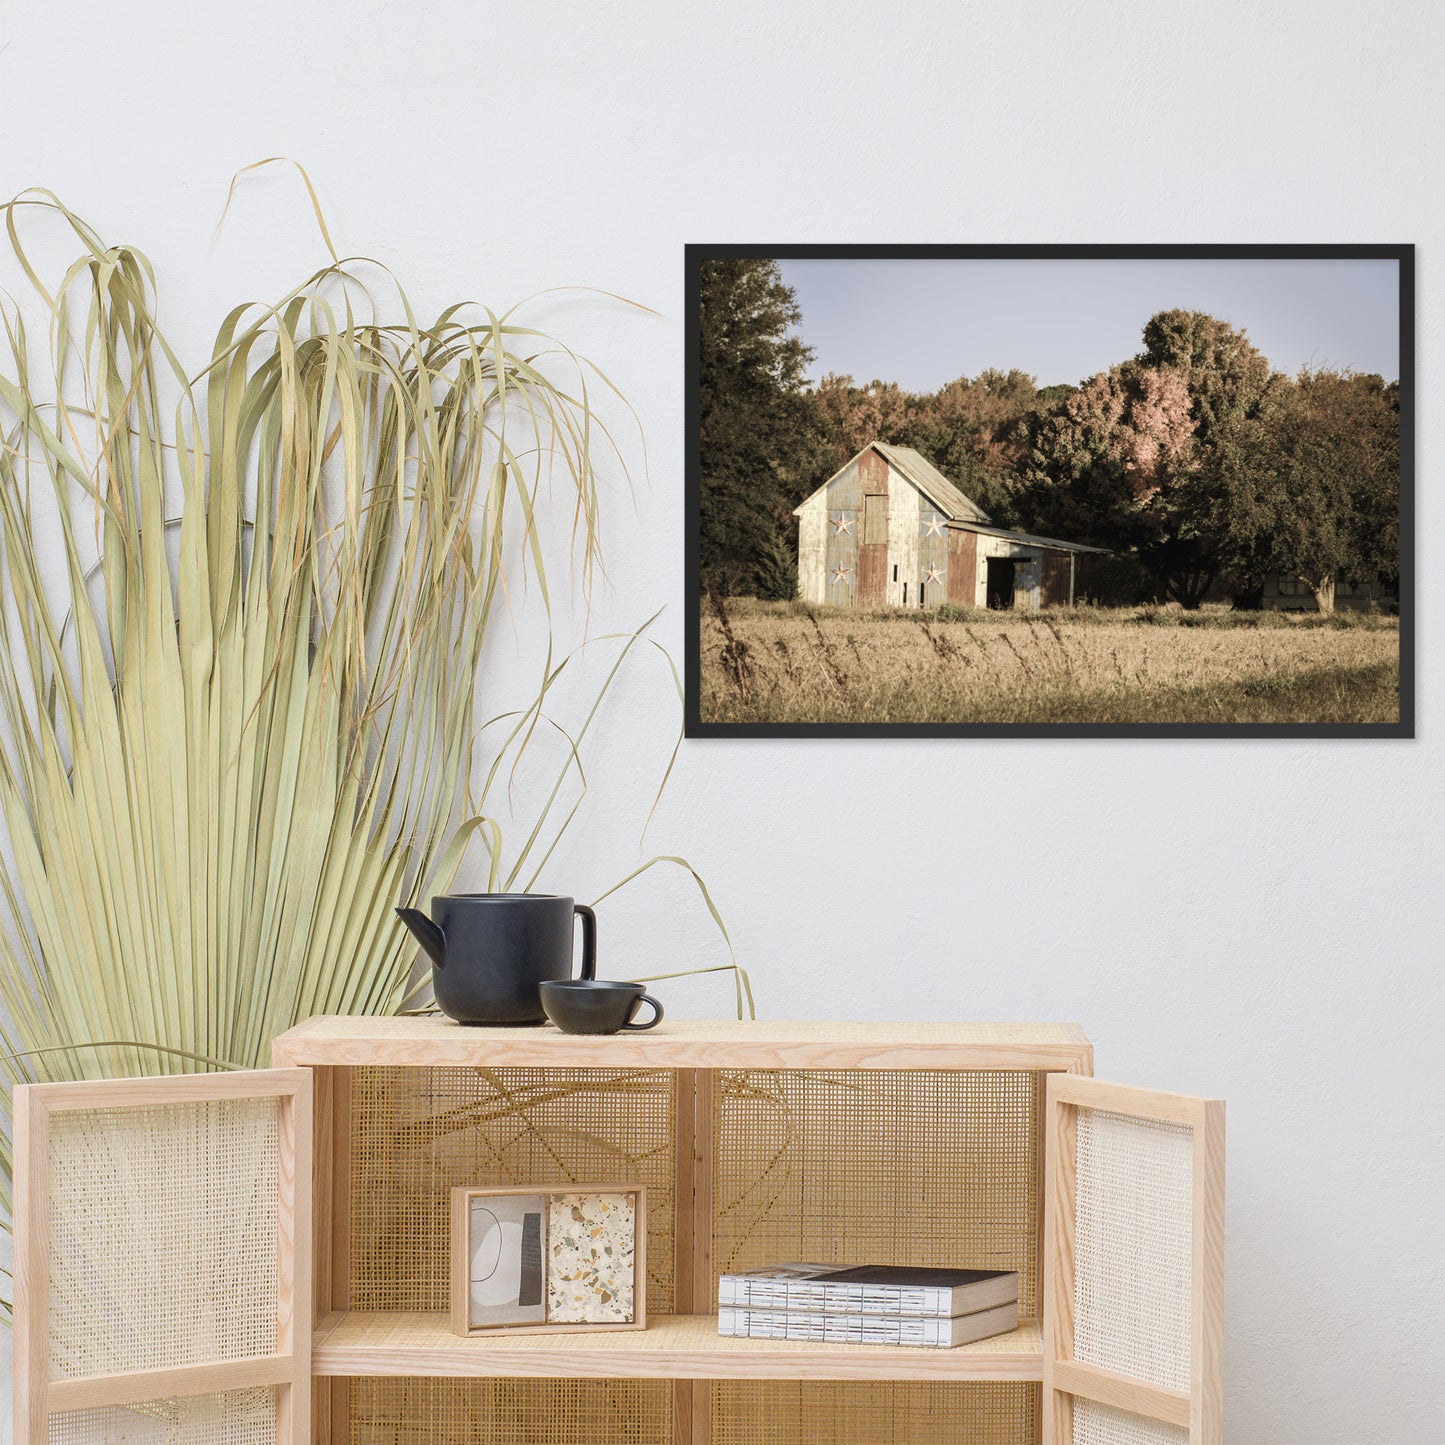 Patriotic Barn in Field Aged Effect Framed Photo Paper Wall Art Prints